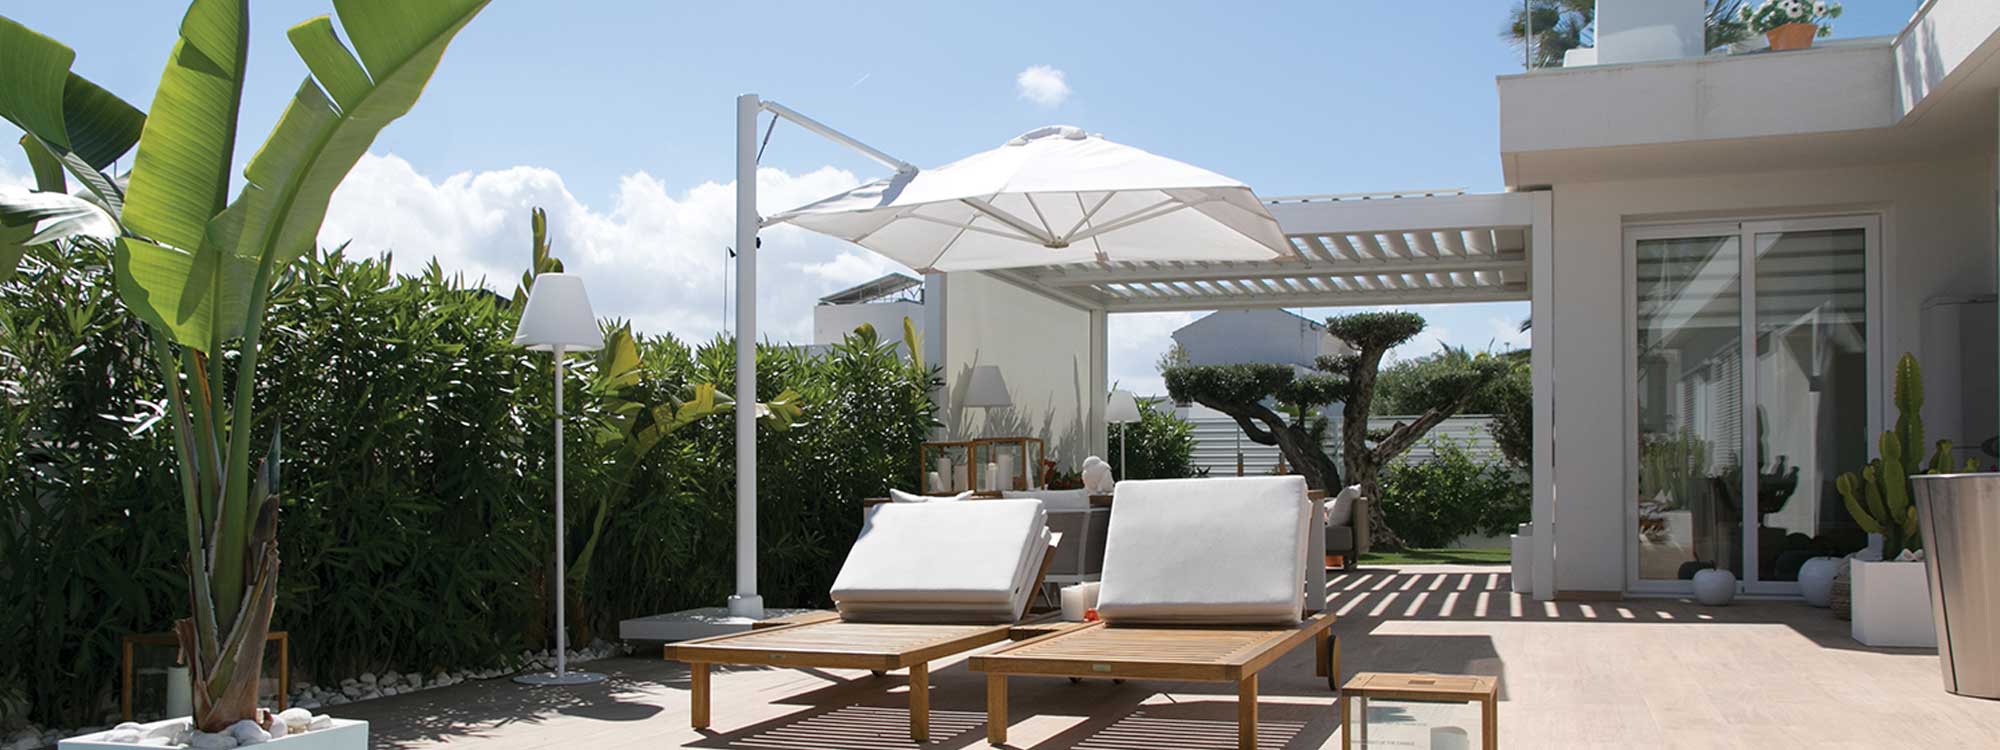 P7 cantilever parasol is a user friendly garden shade & side pole parasol canopy with heating and lighting by Prostor hospitality parasol Co.